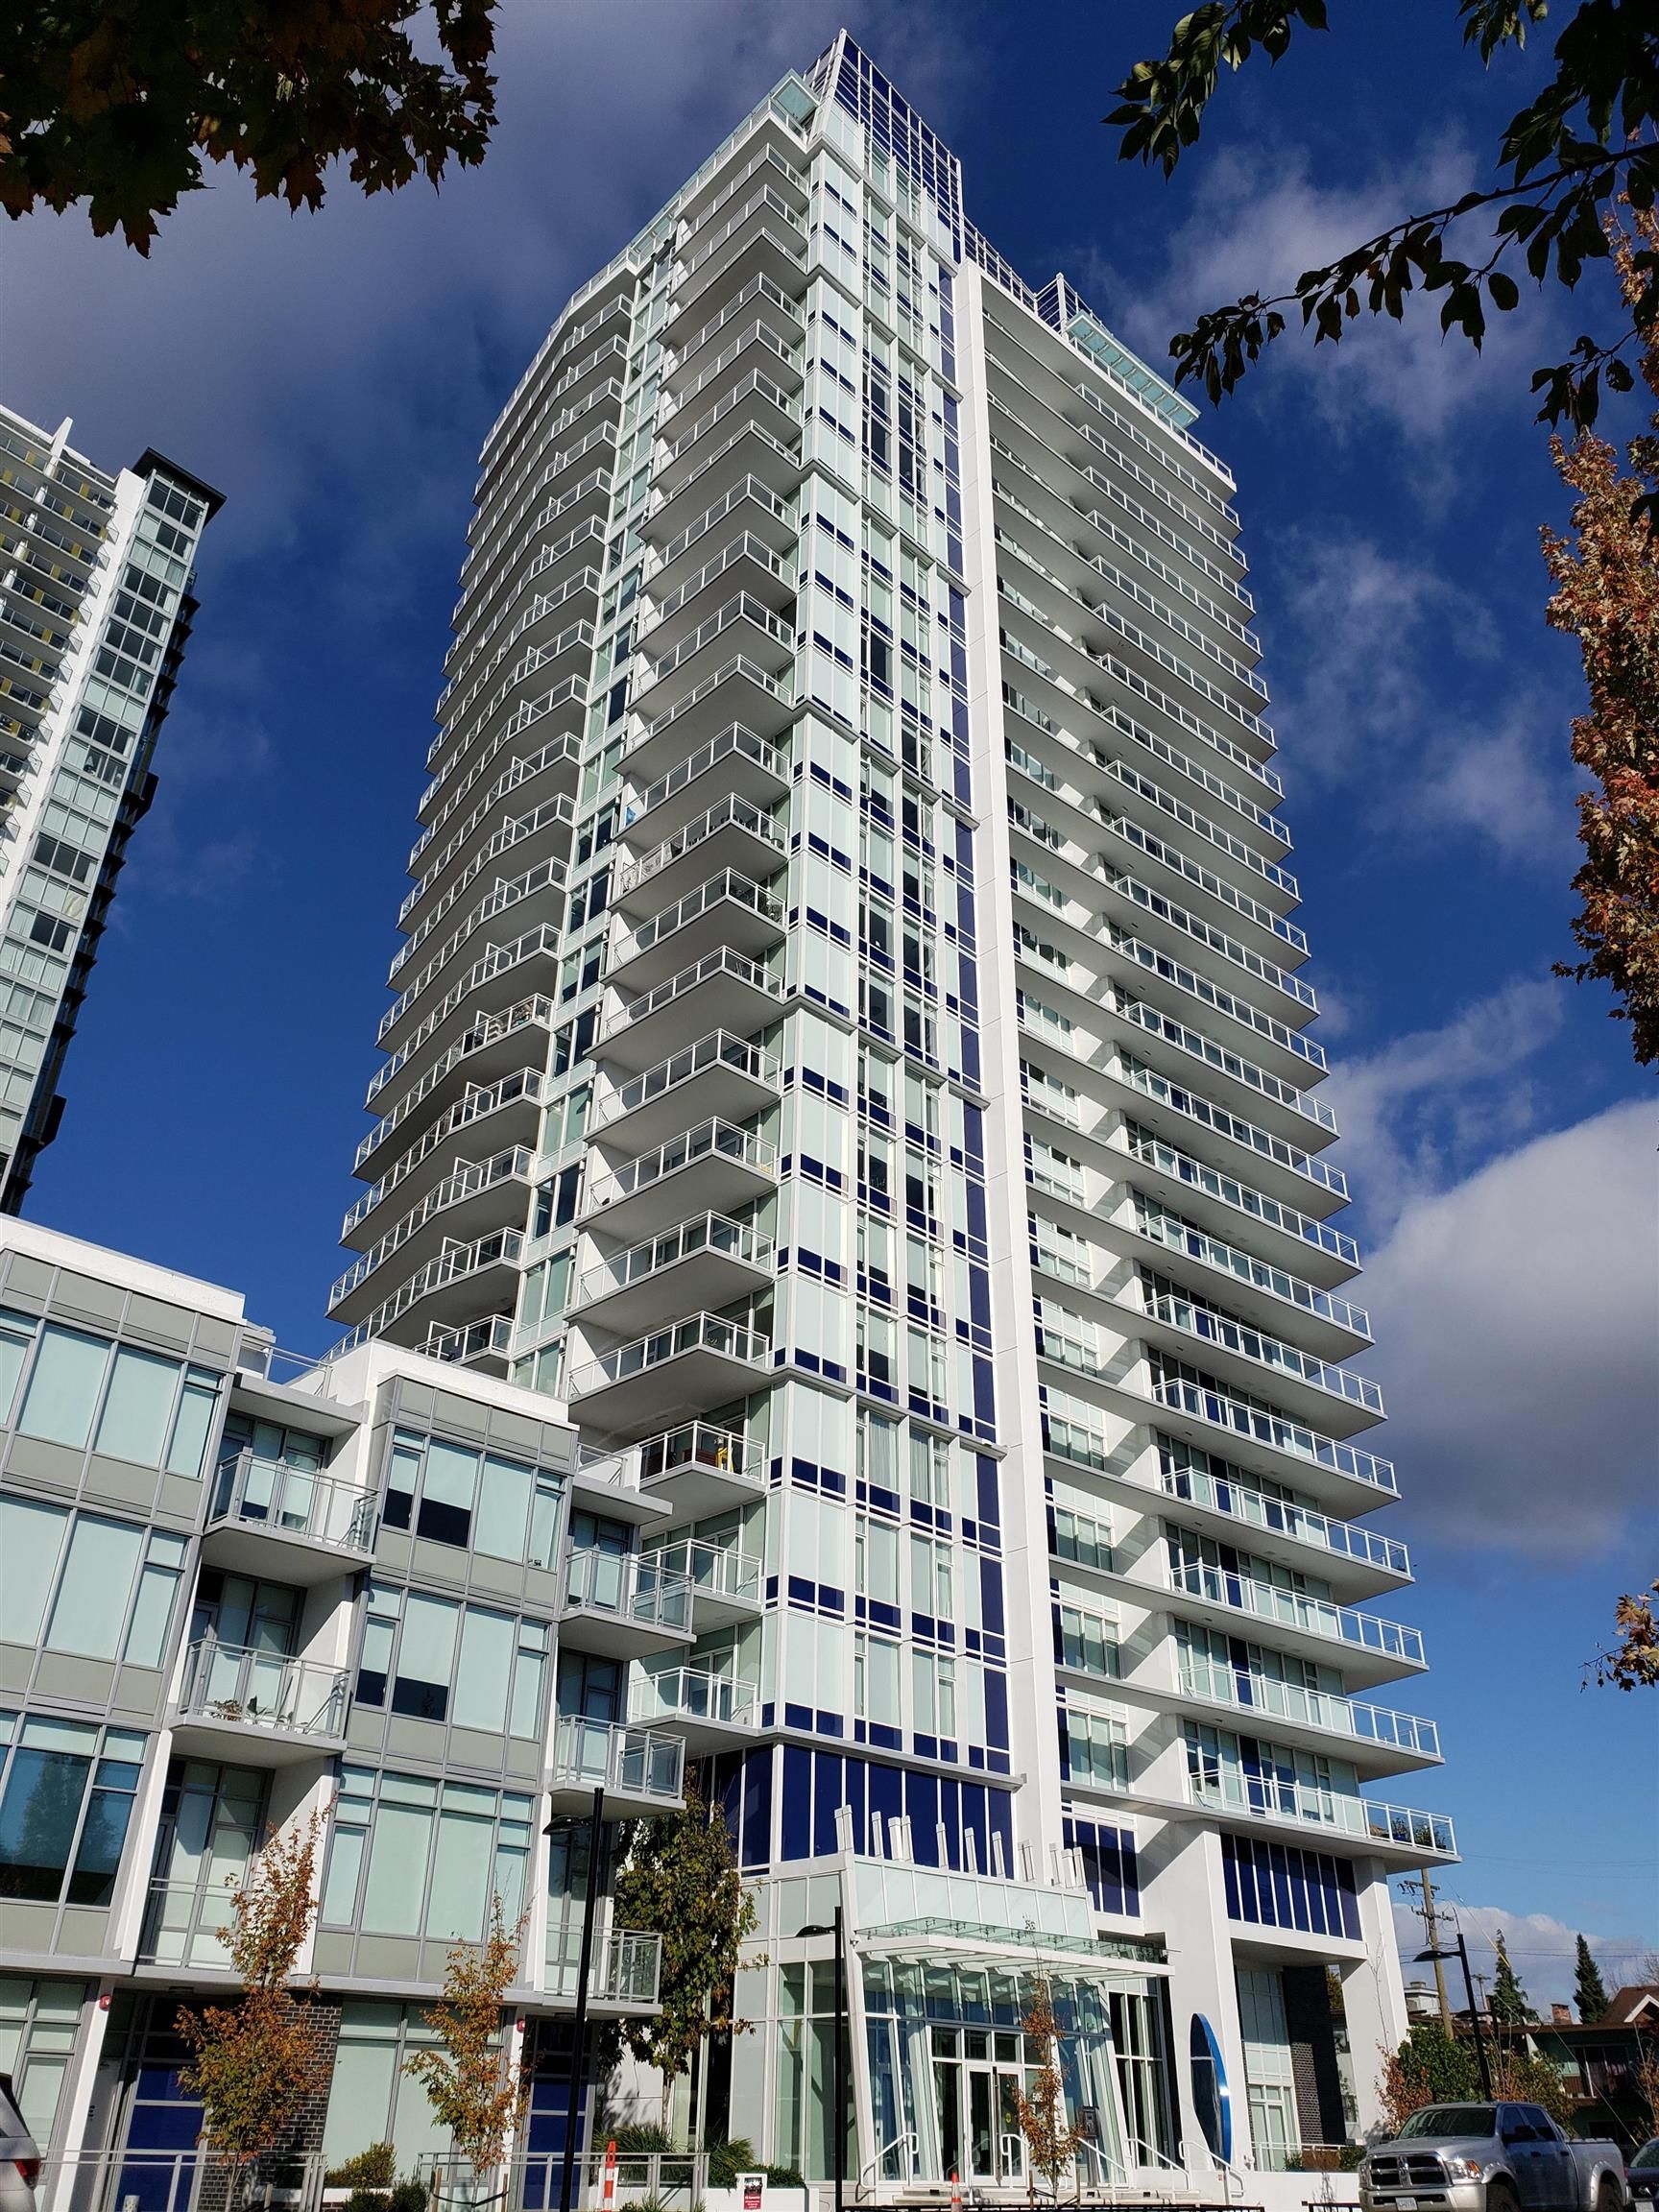 Main Photo: 506 5051 IMPERIAL STREET in Burnaby: Metrotown Condo for sale (Burnaby South)  : MLS®# R2626977